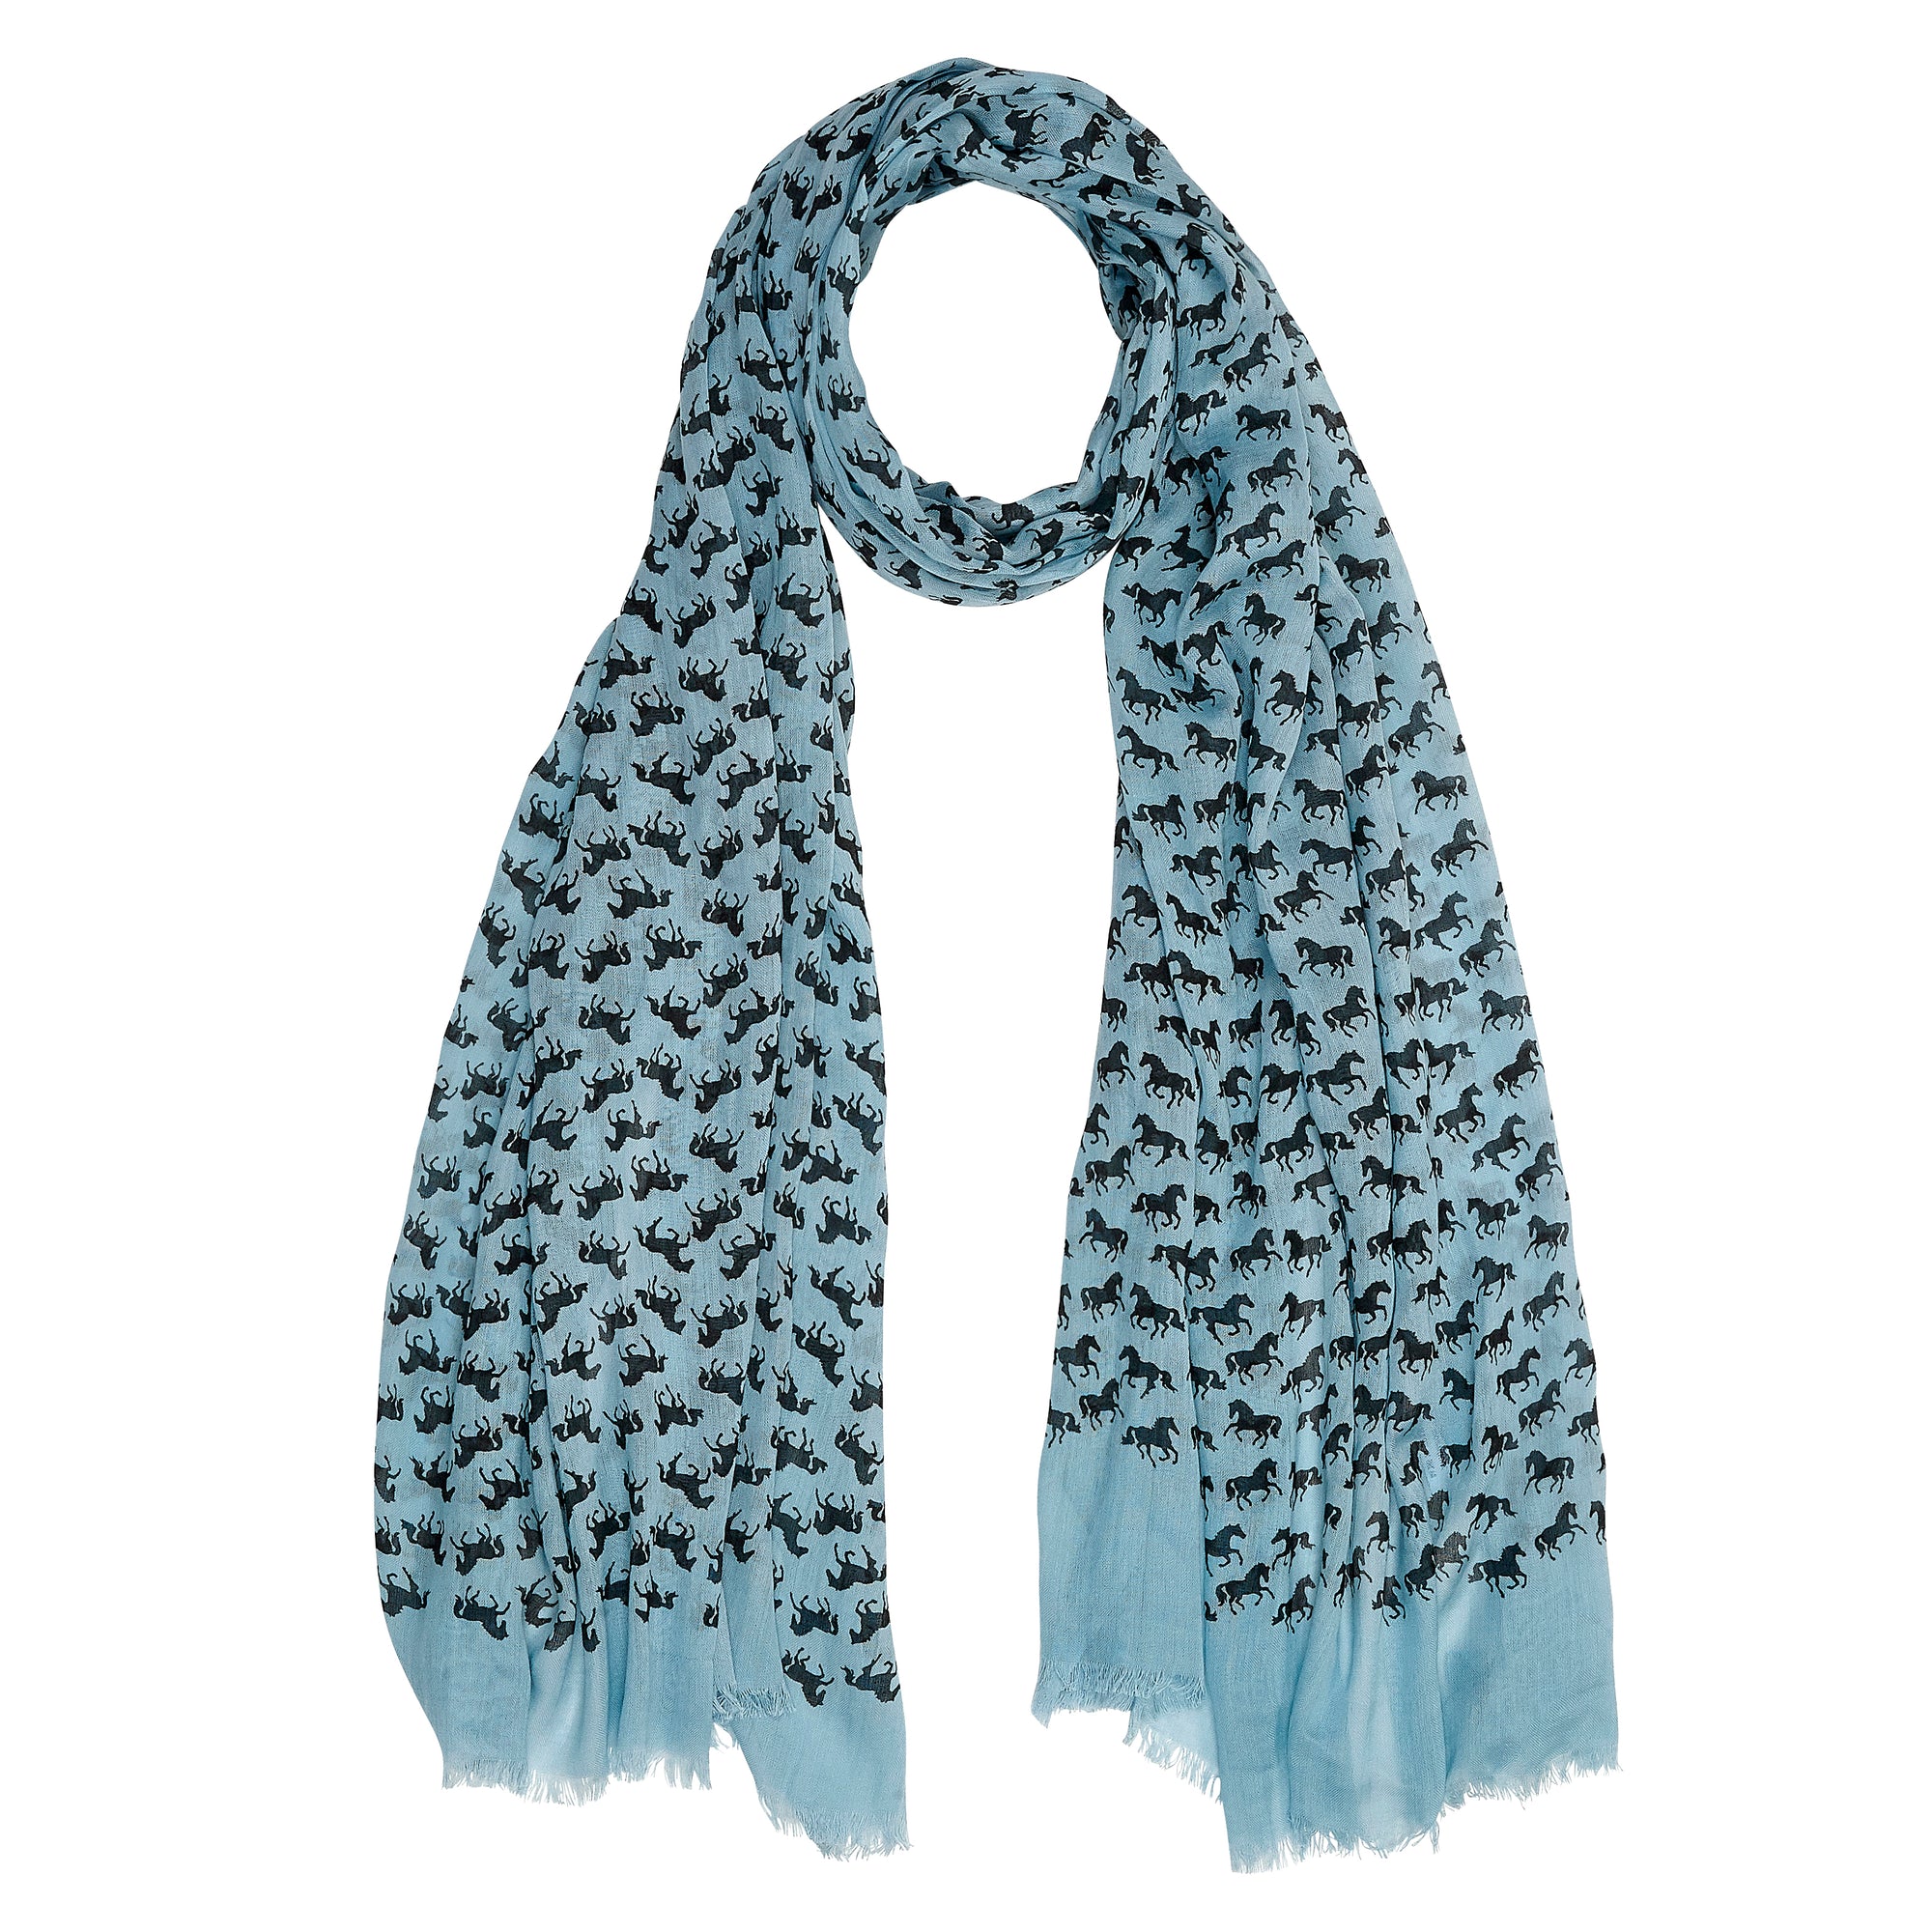 ROASTED PECAN LEOPARD PRINT CASHMERE AND SILK SCARF